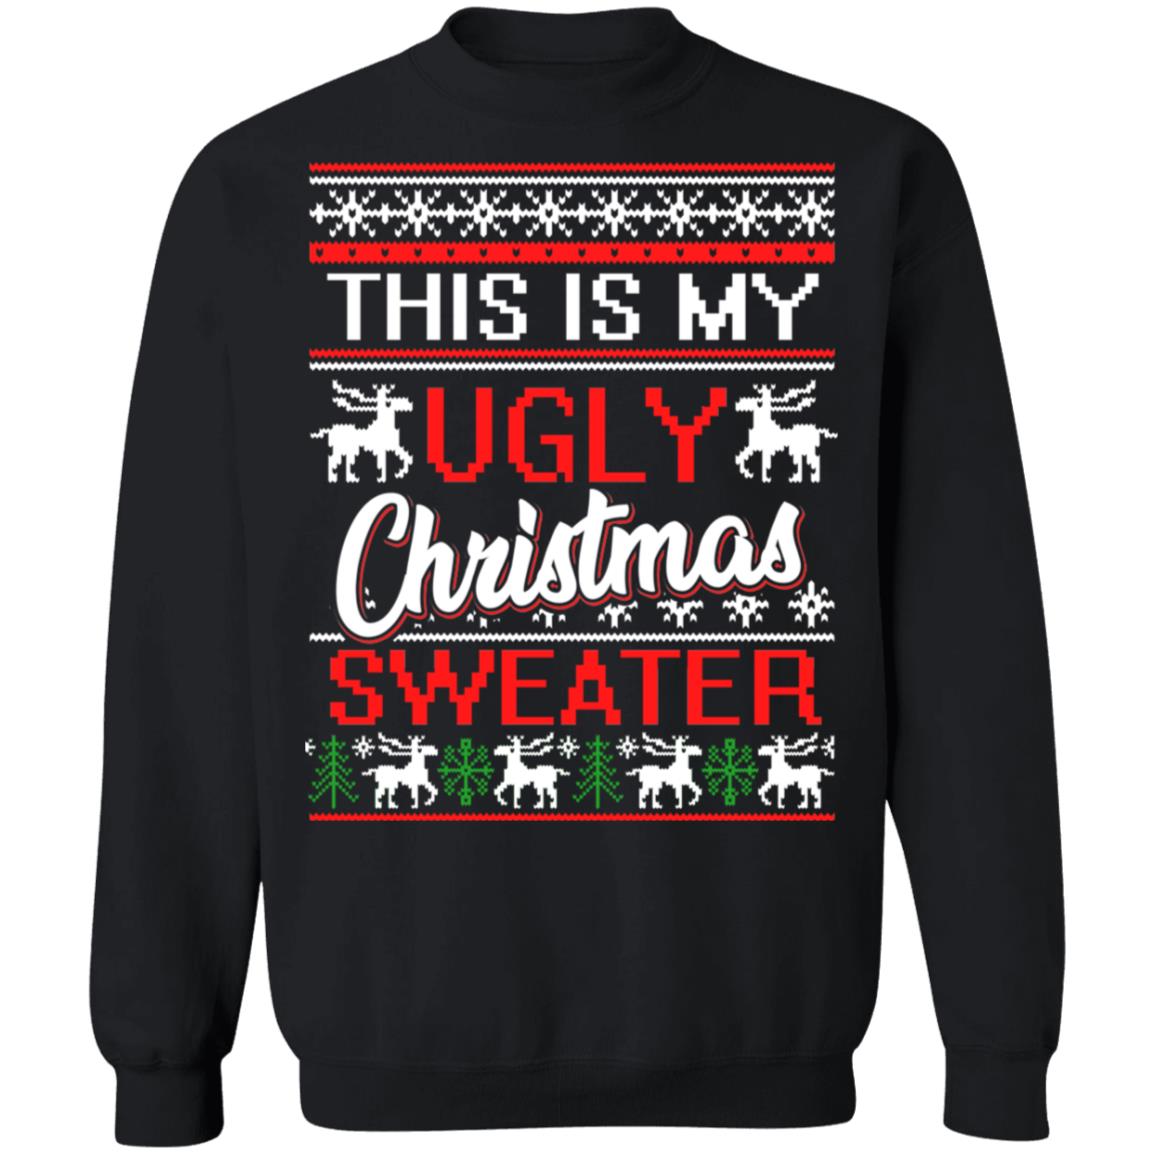 This is my Ugly Christmas Sweater, Shirt, Hoodie